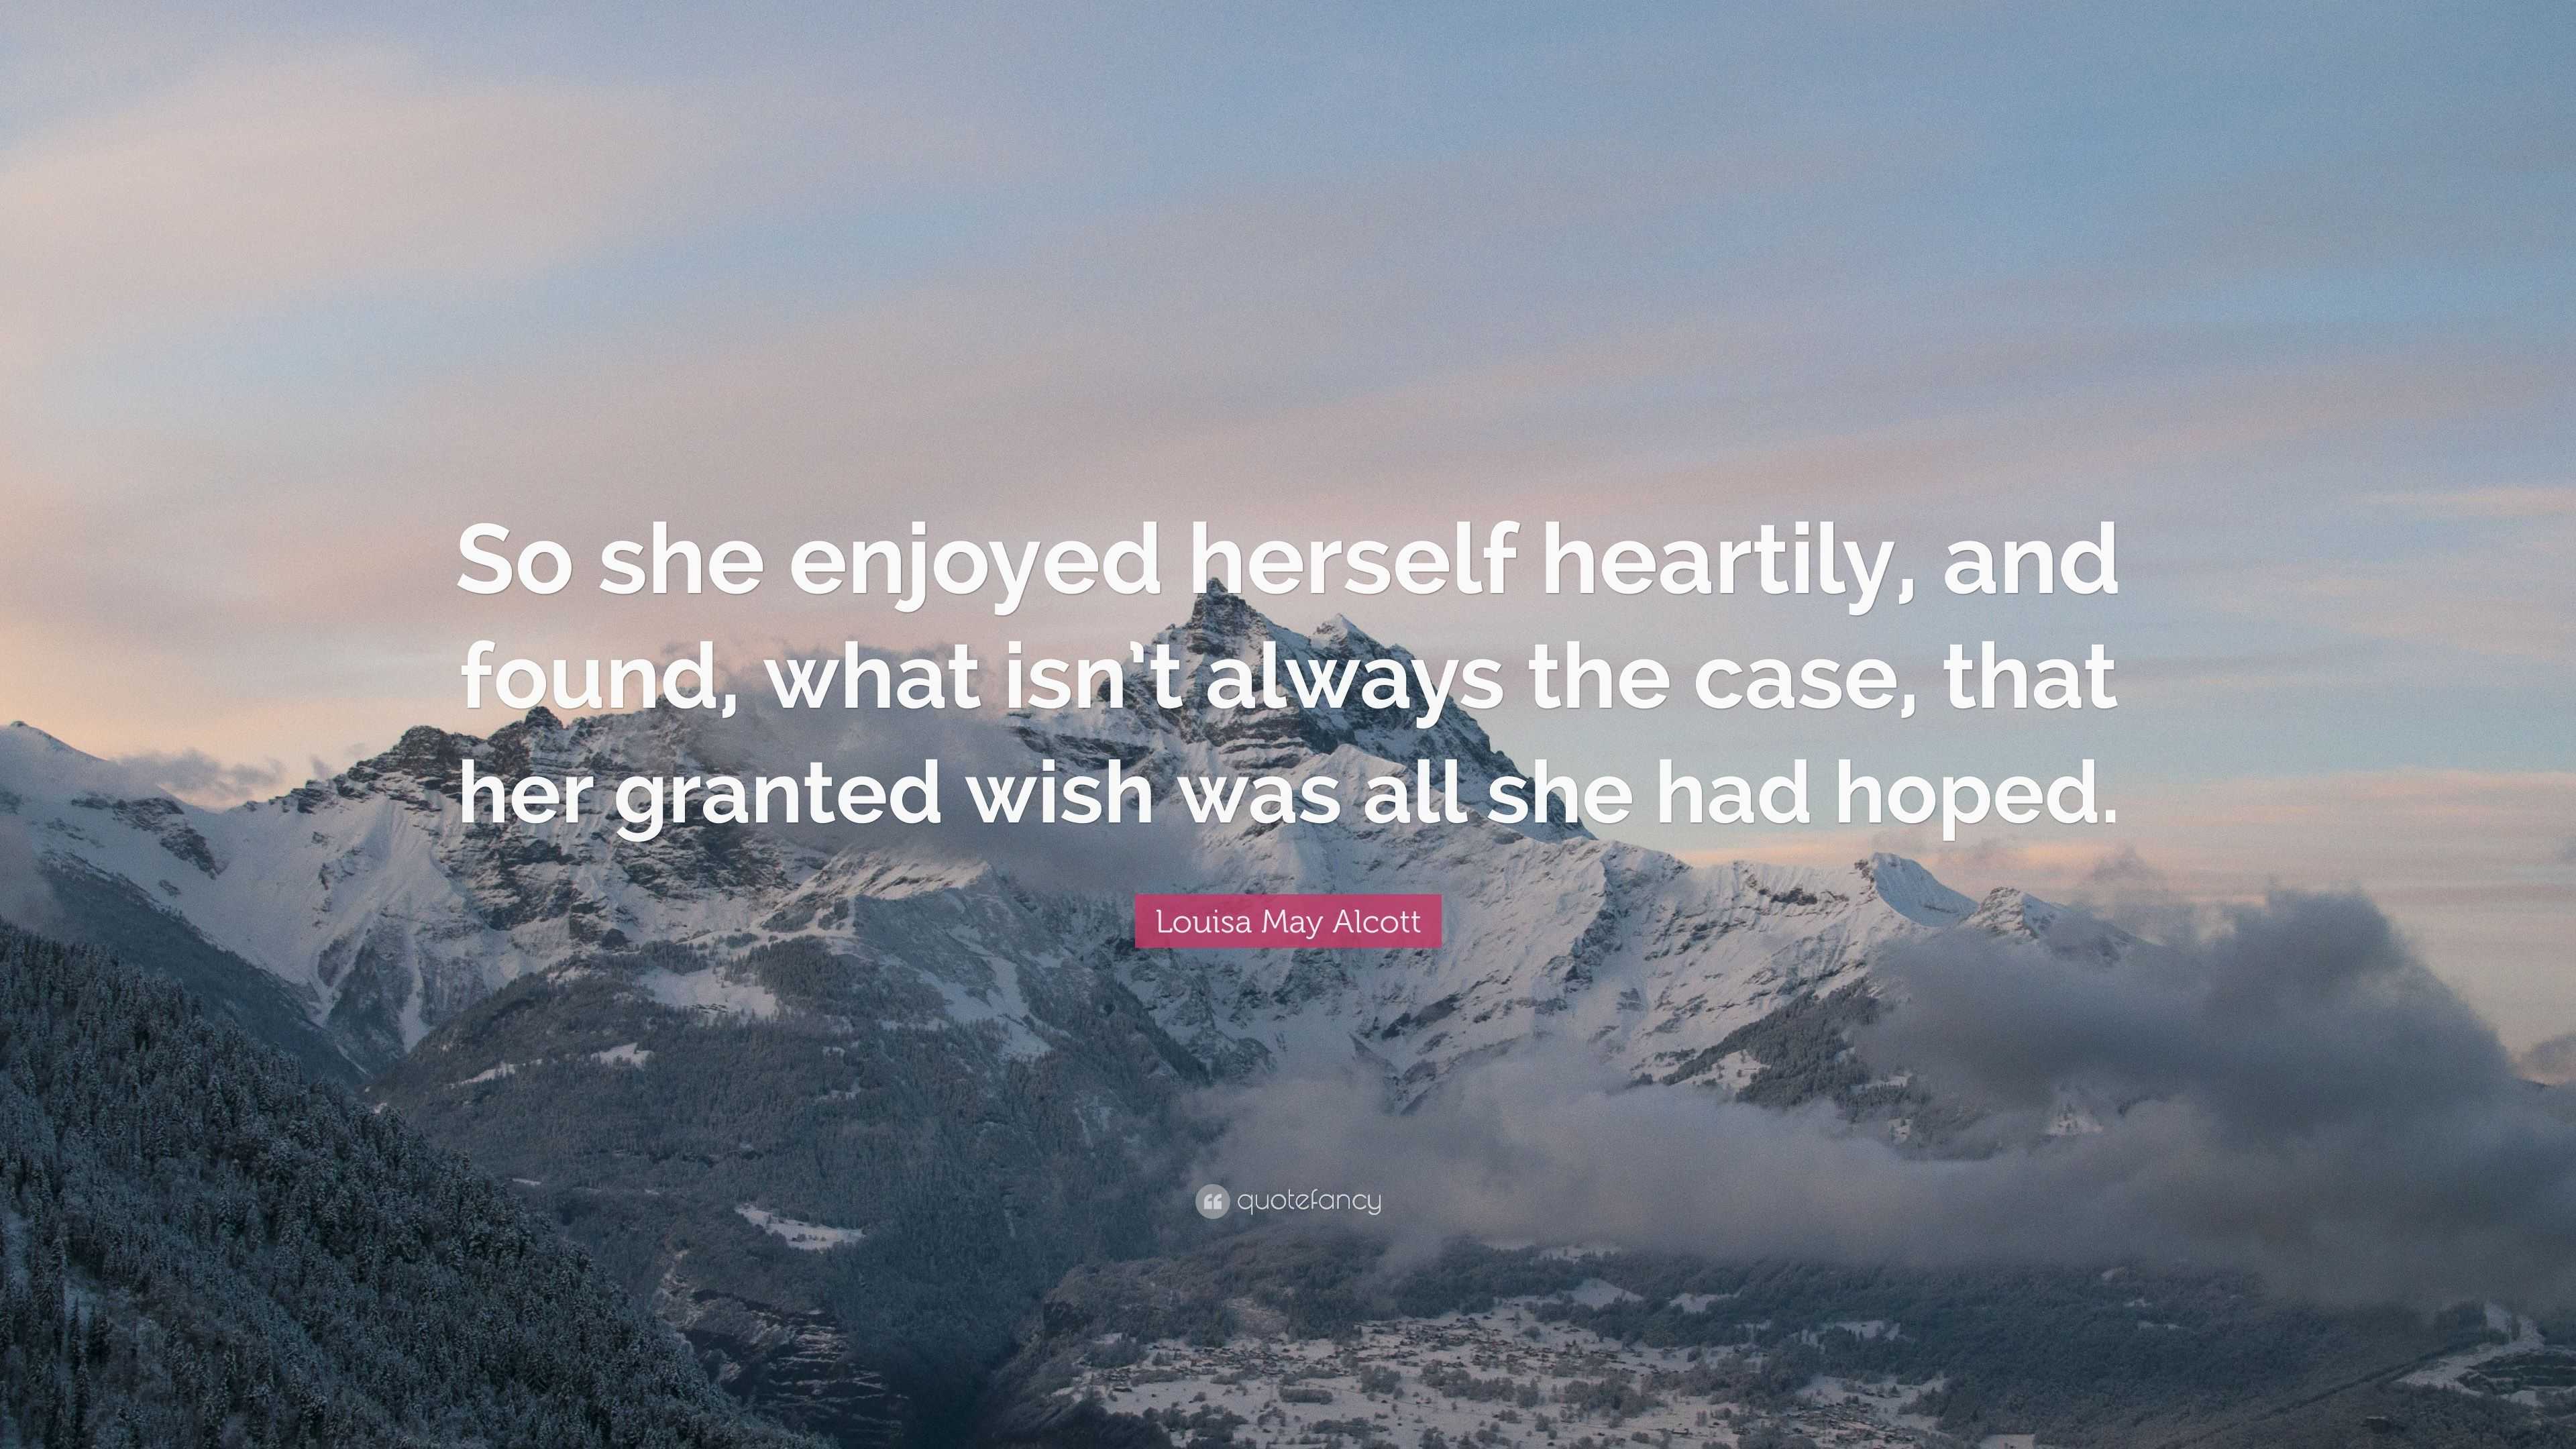 Louisa May Alcott Quote: “So she enjoyed herself heartily, and found ...